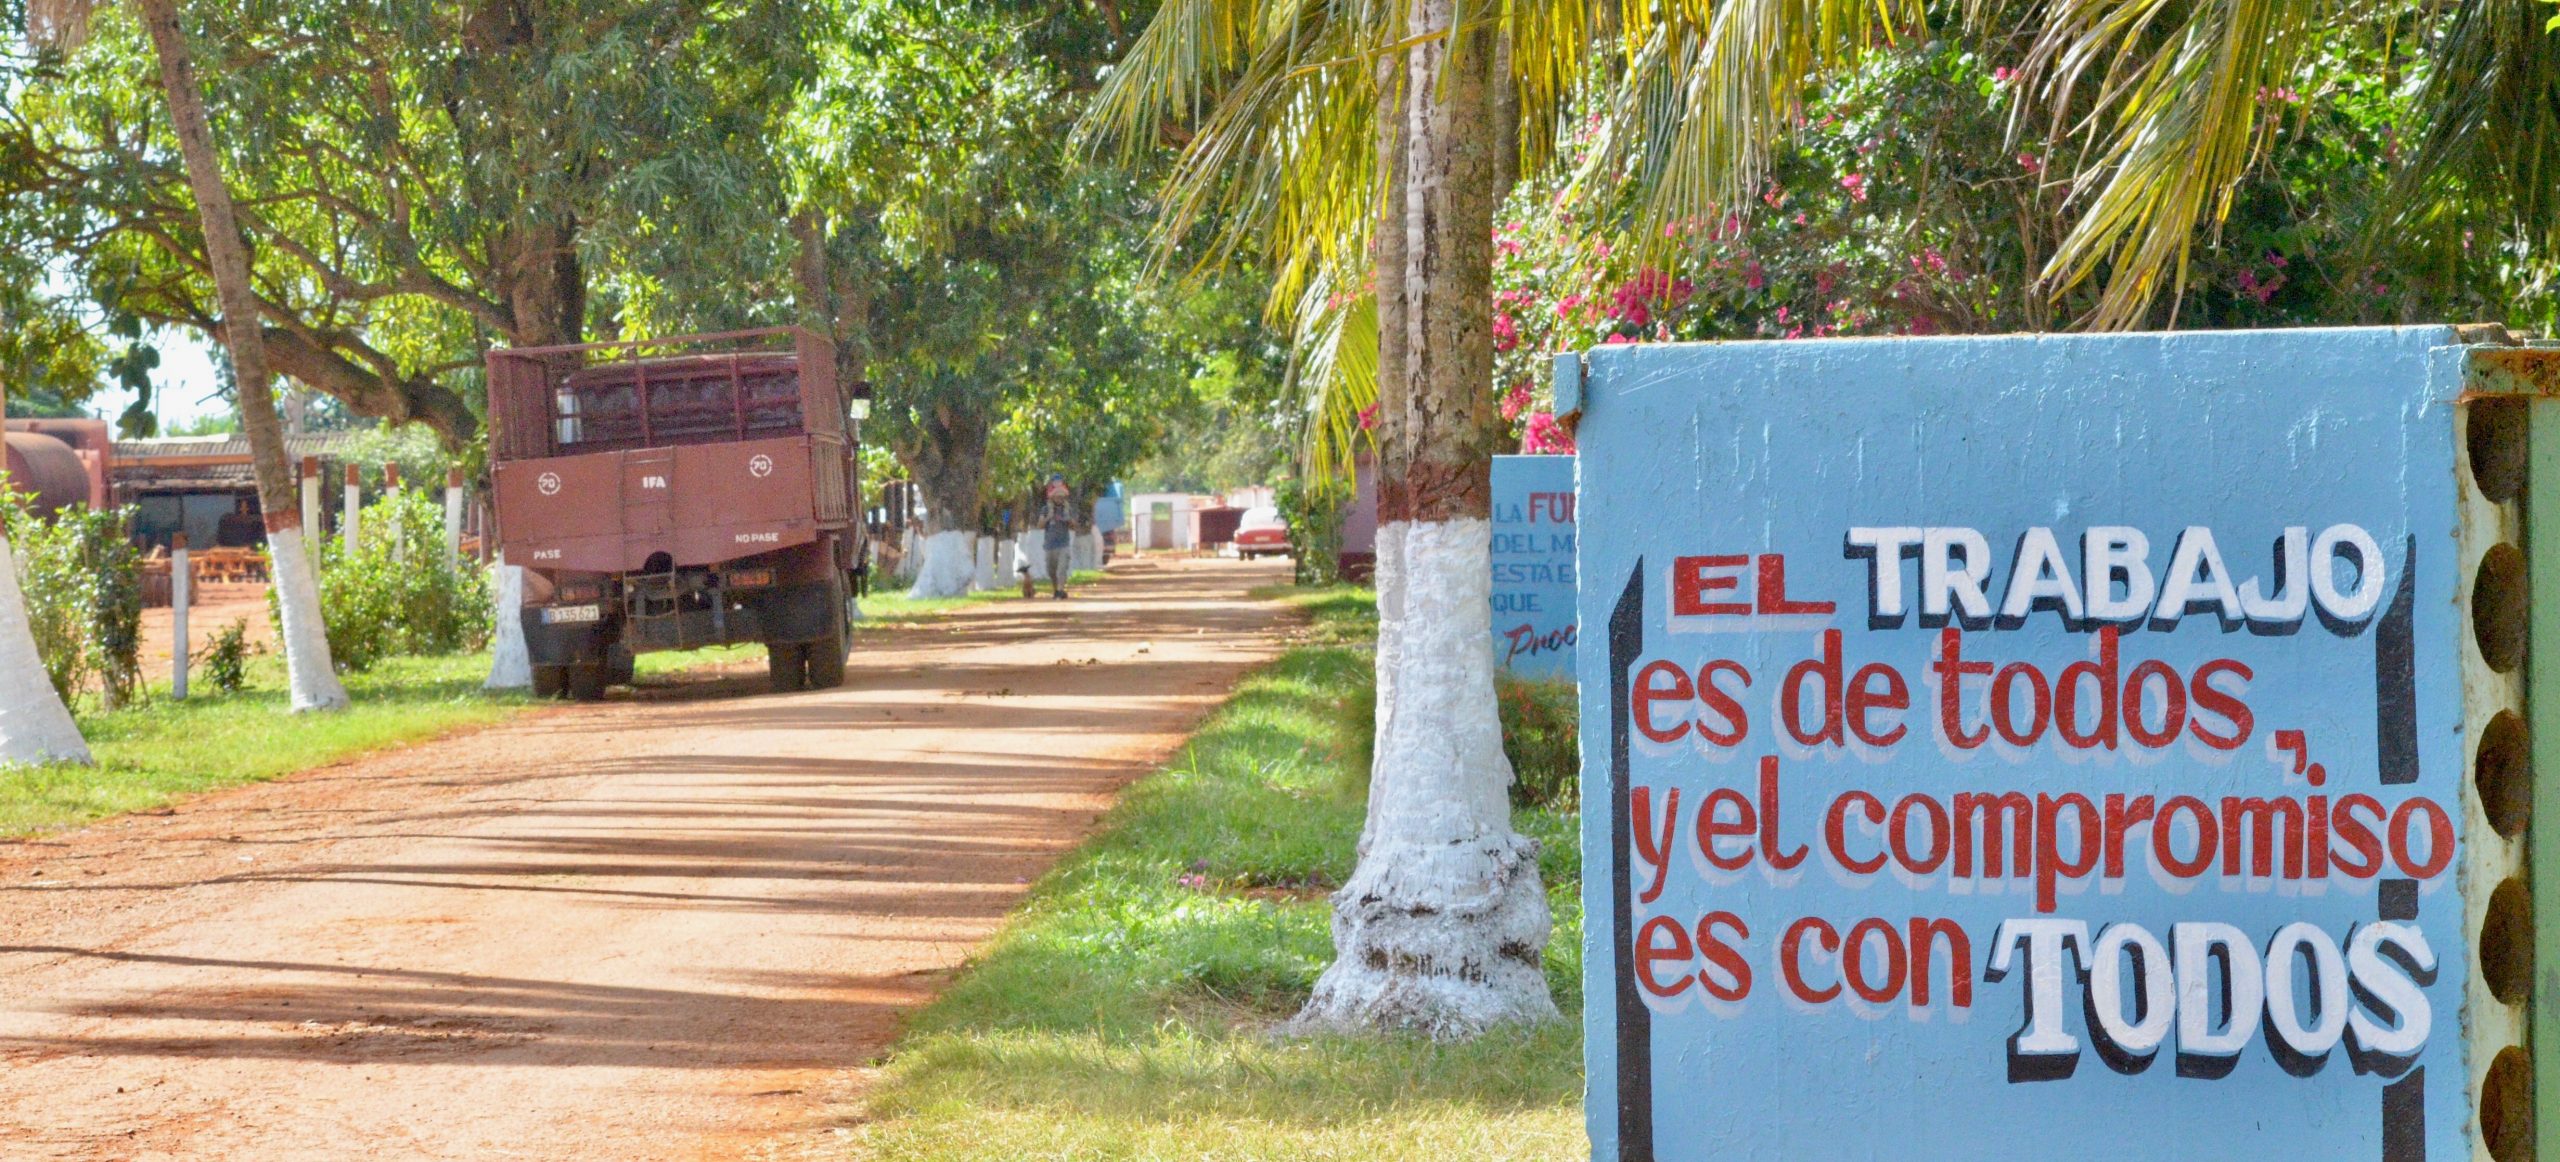 Agroecology meeting in Cuba 2019 - street sign